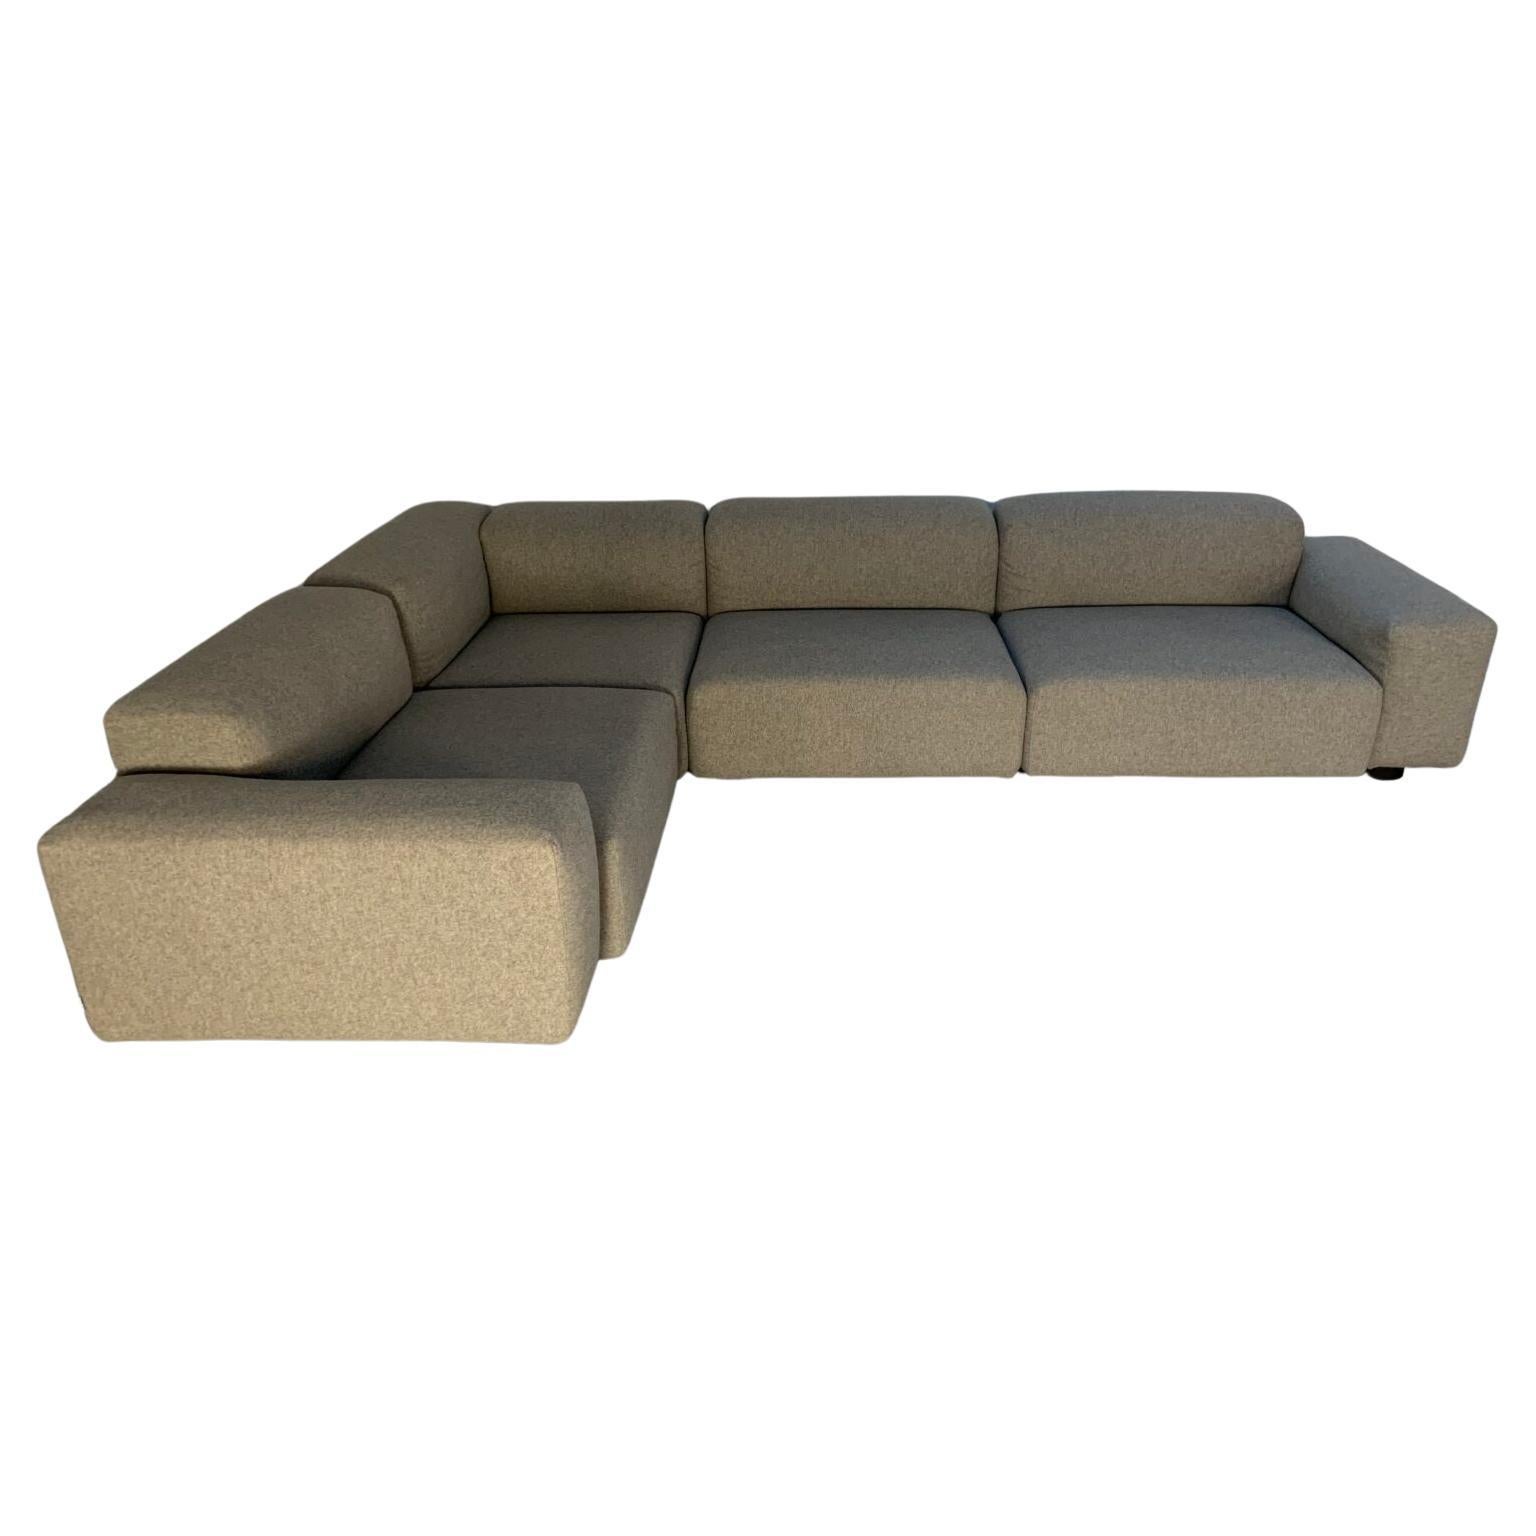 L-förmiges Sofa „Place“ von Vitra aus grauer Wolle in „Cosy“-Form